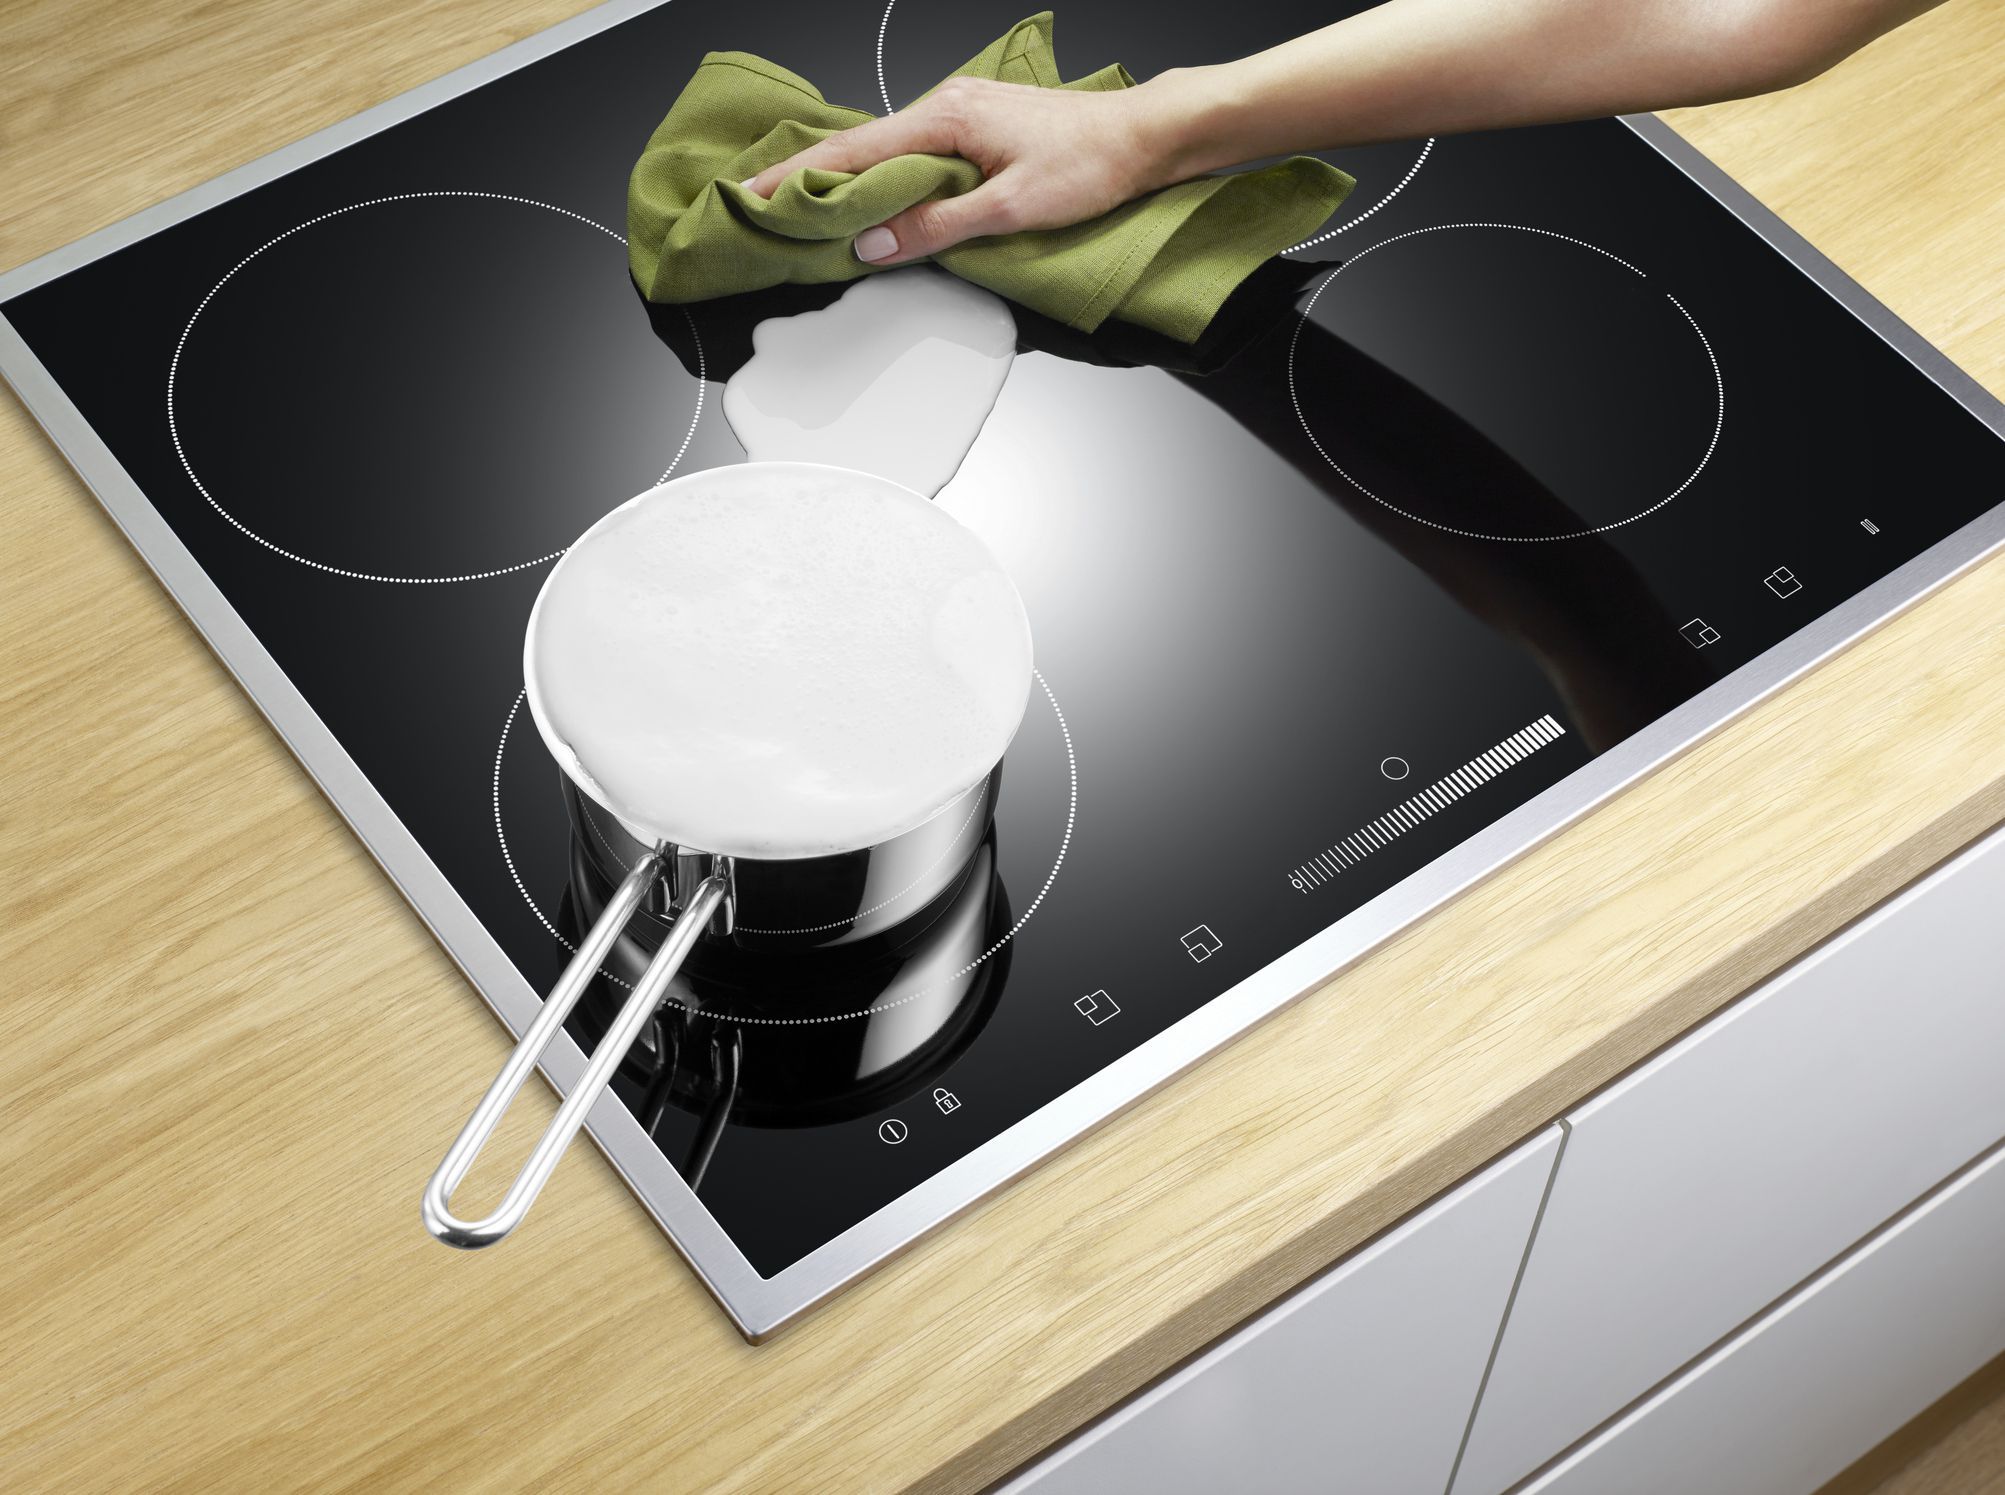 How To Care Of Your Ceramic Or Glass Cooktop